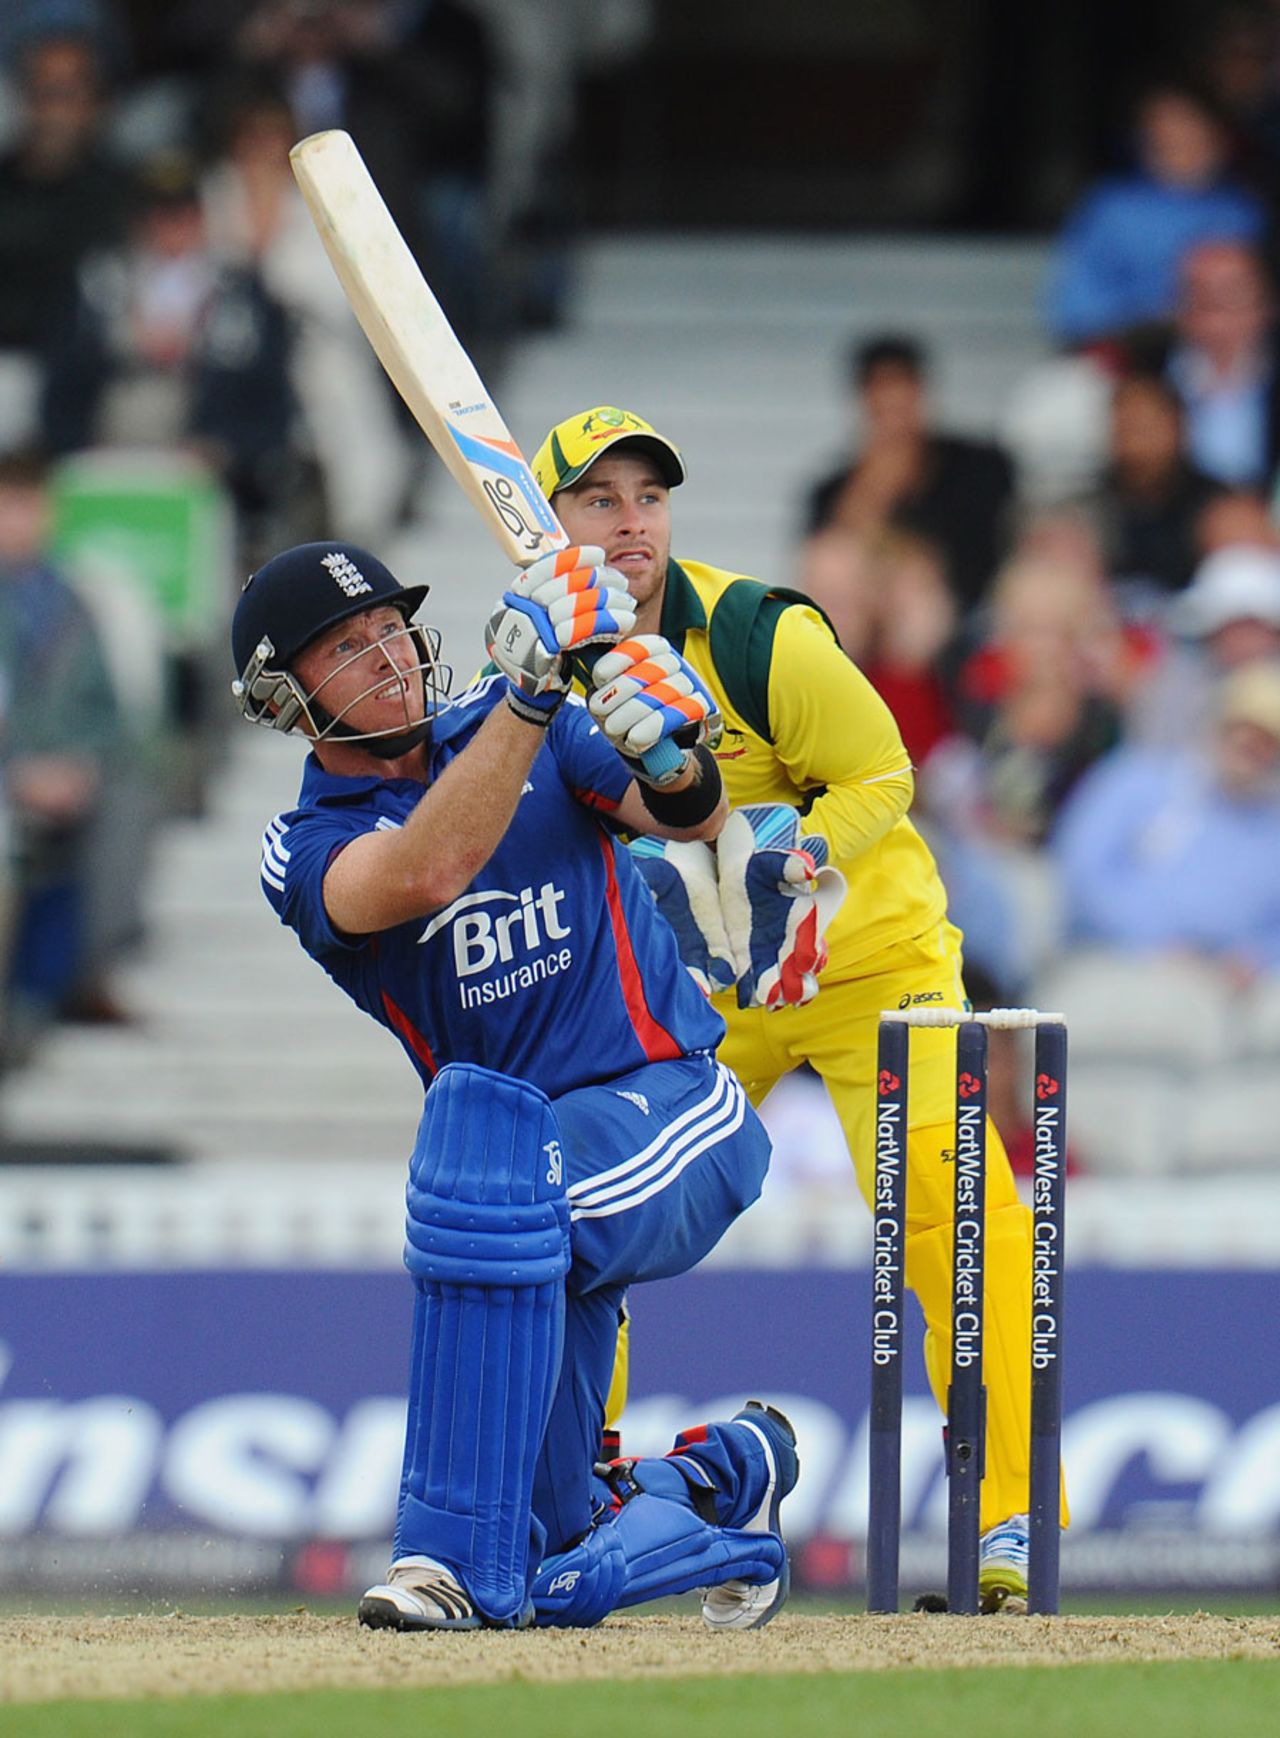 Ian Bell lofts a shot into the leg side during his innings of 75, England v Australia, 2nd ODI, The Oval, July 1, 2012